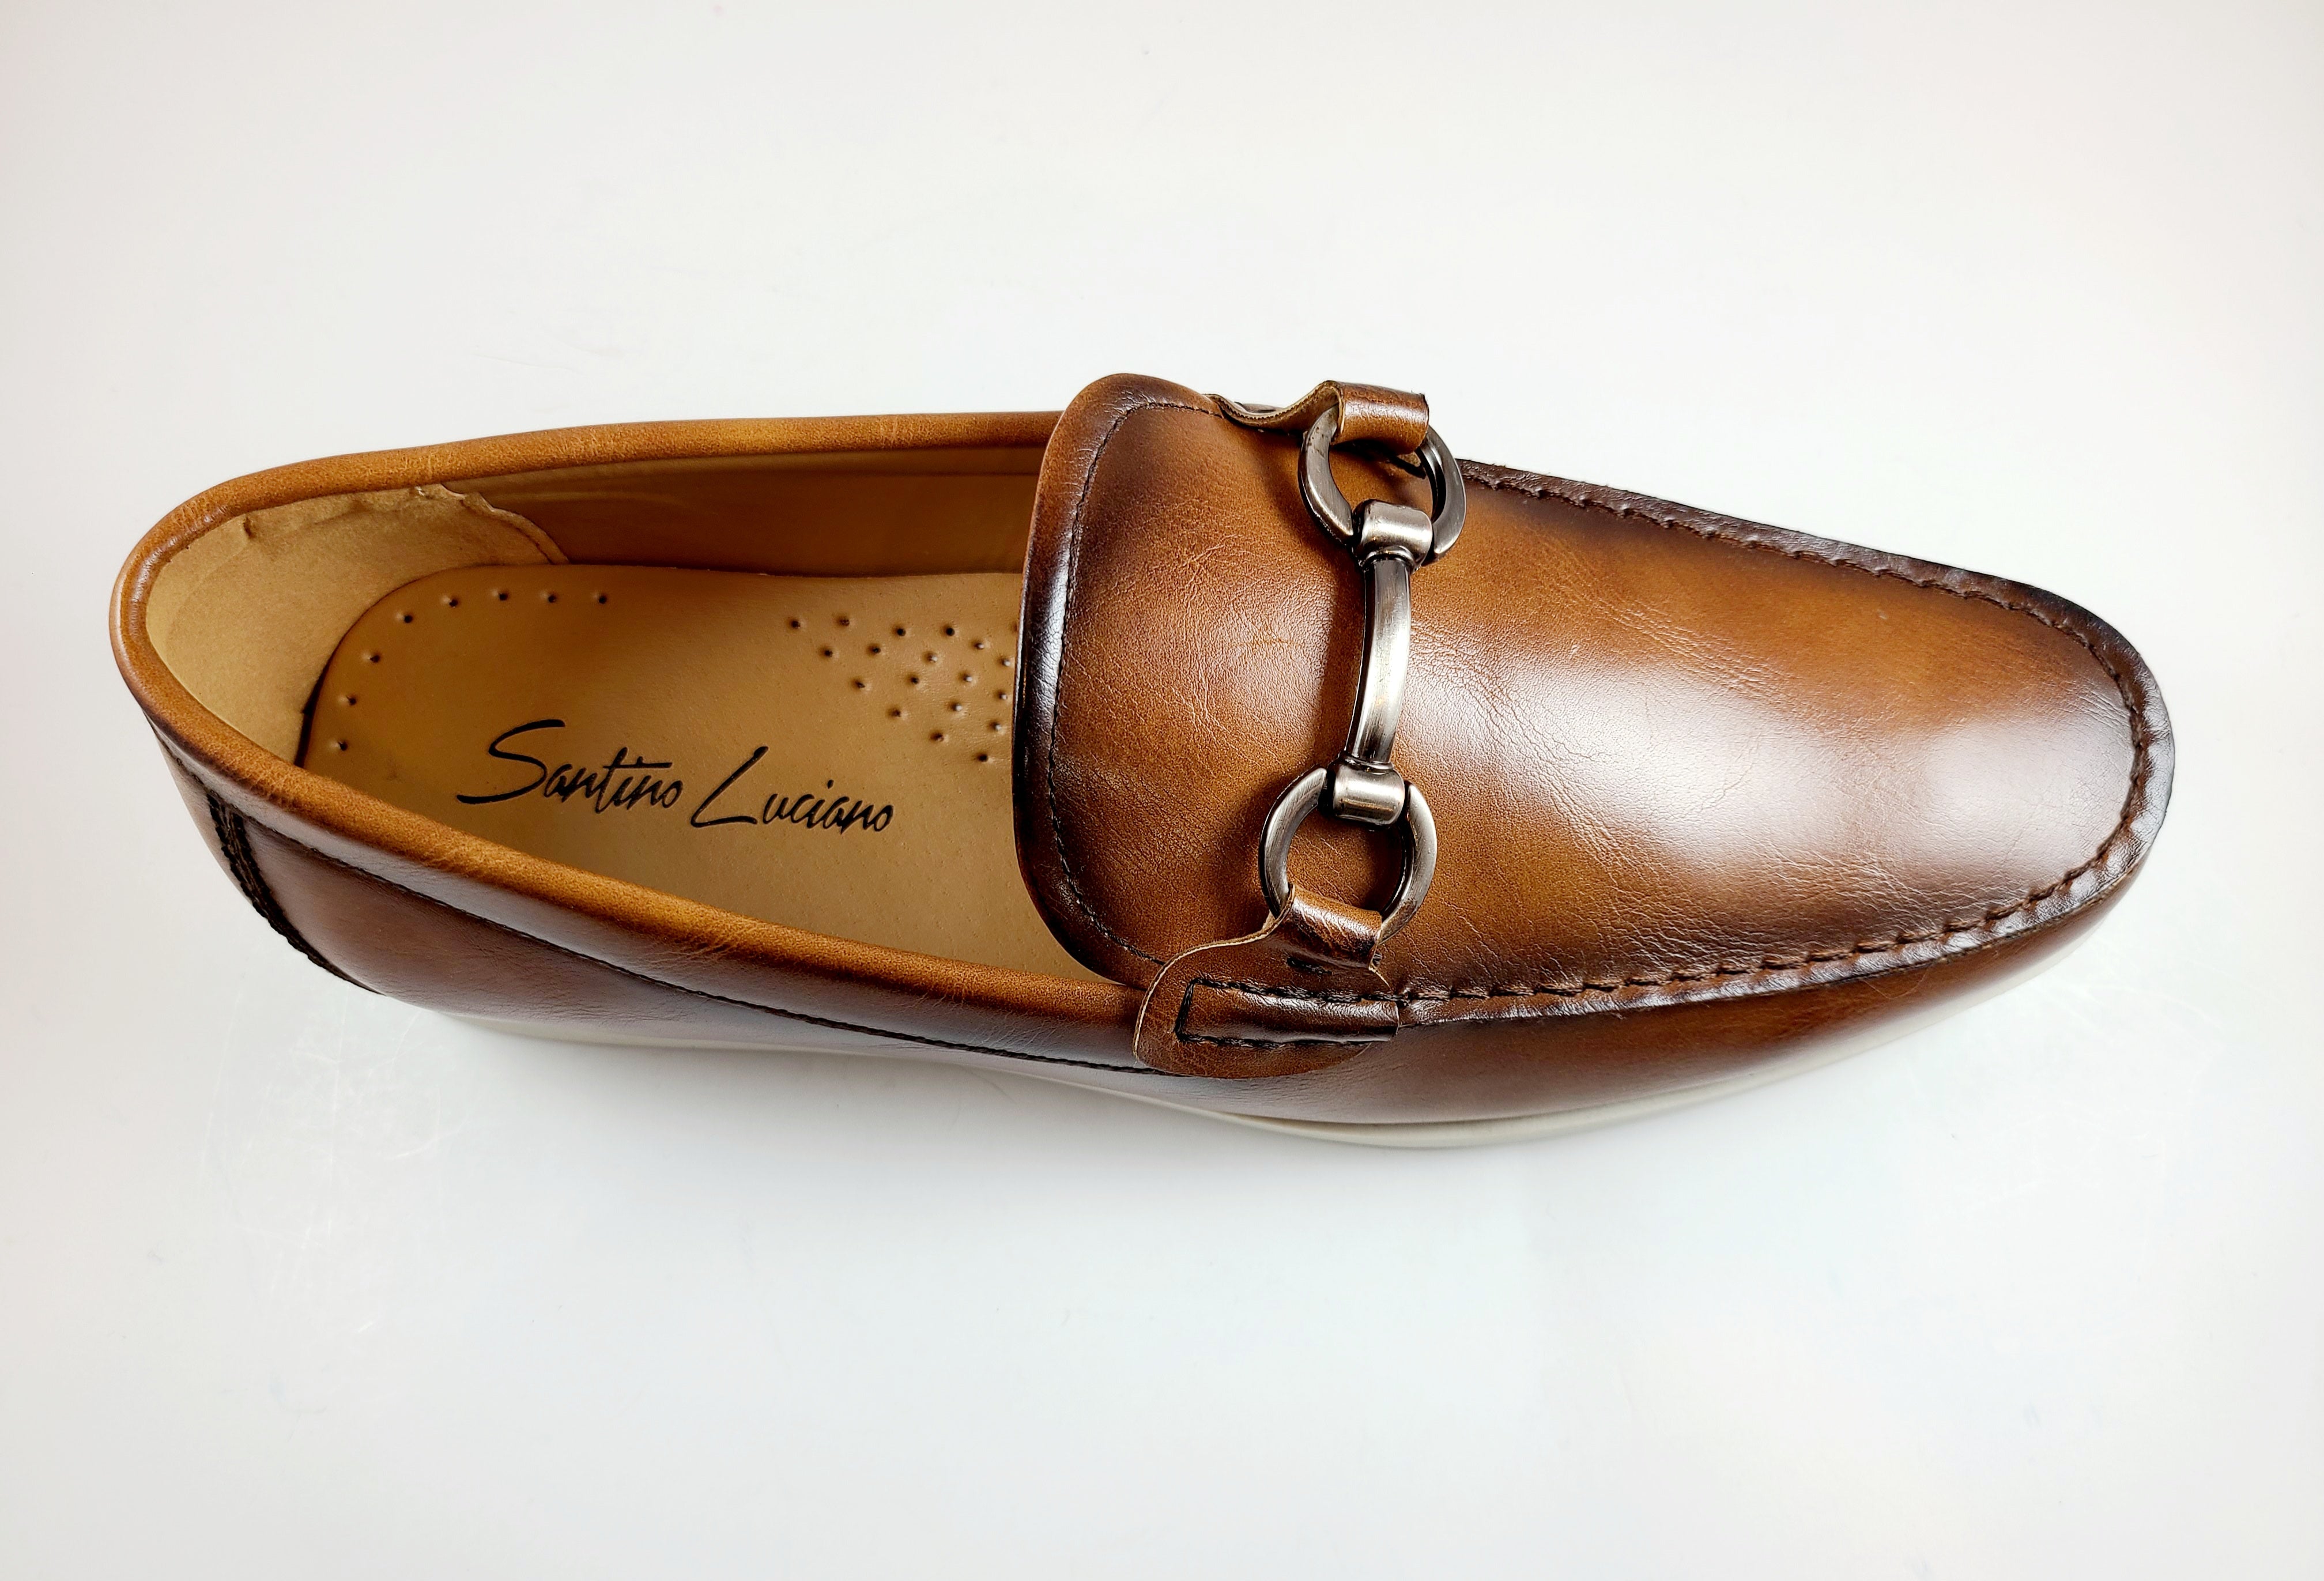 Santino Luciano Slip on Shoes